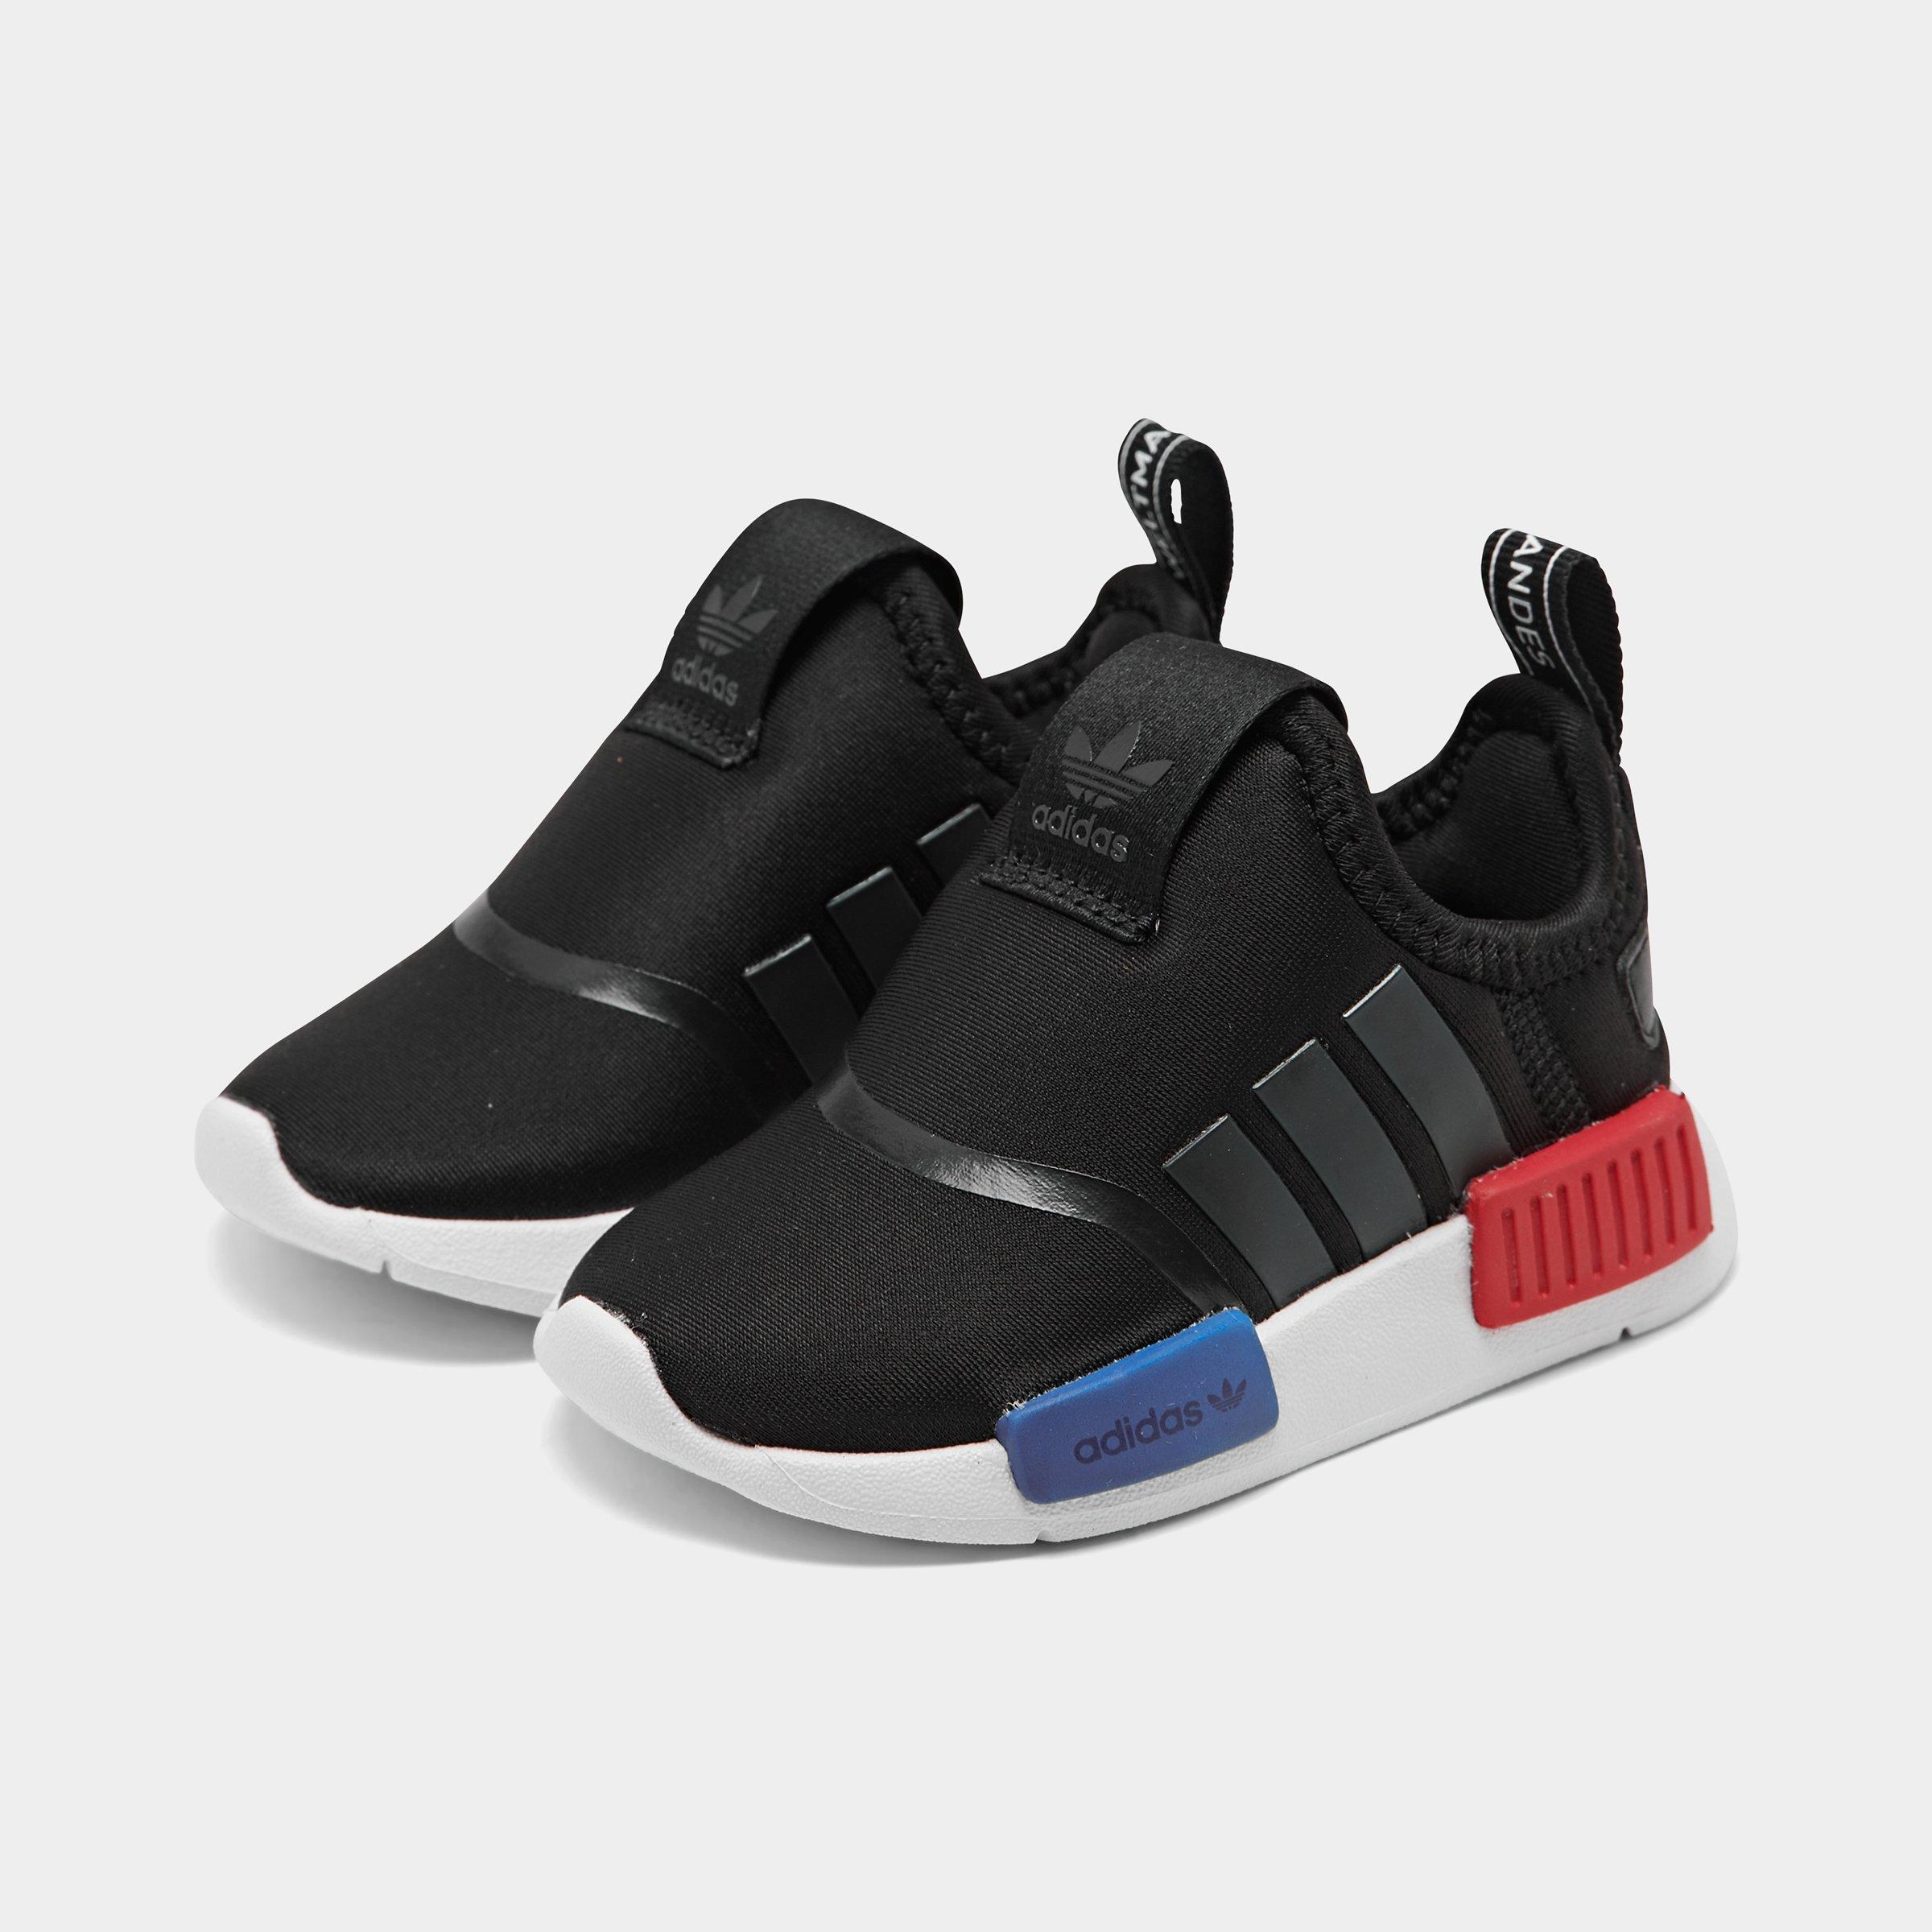 nmd boys shoes